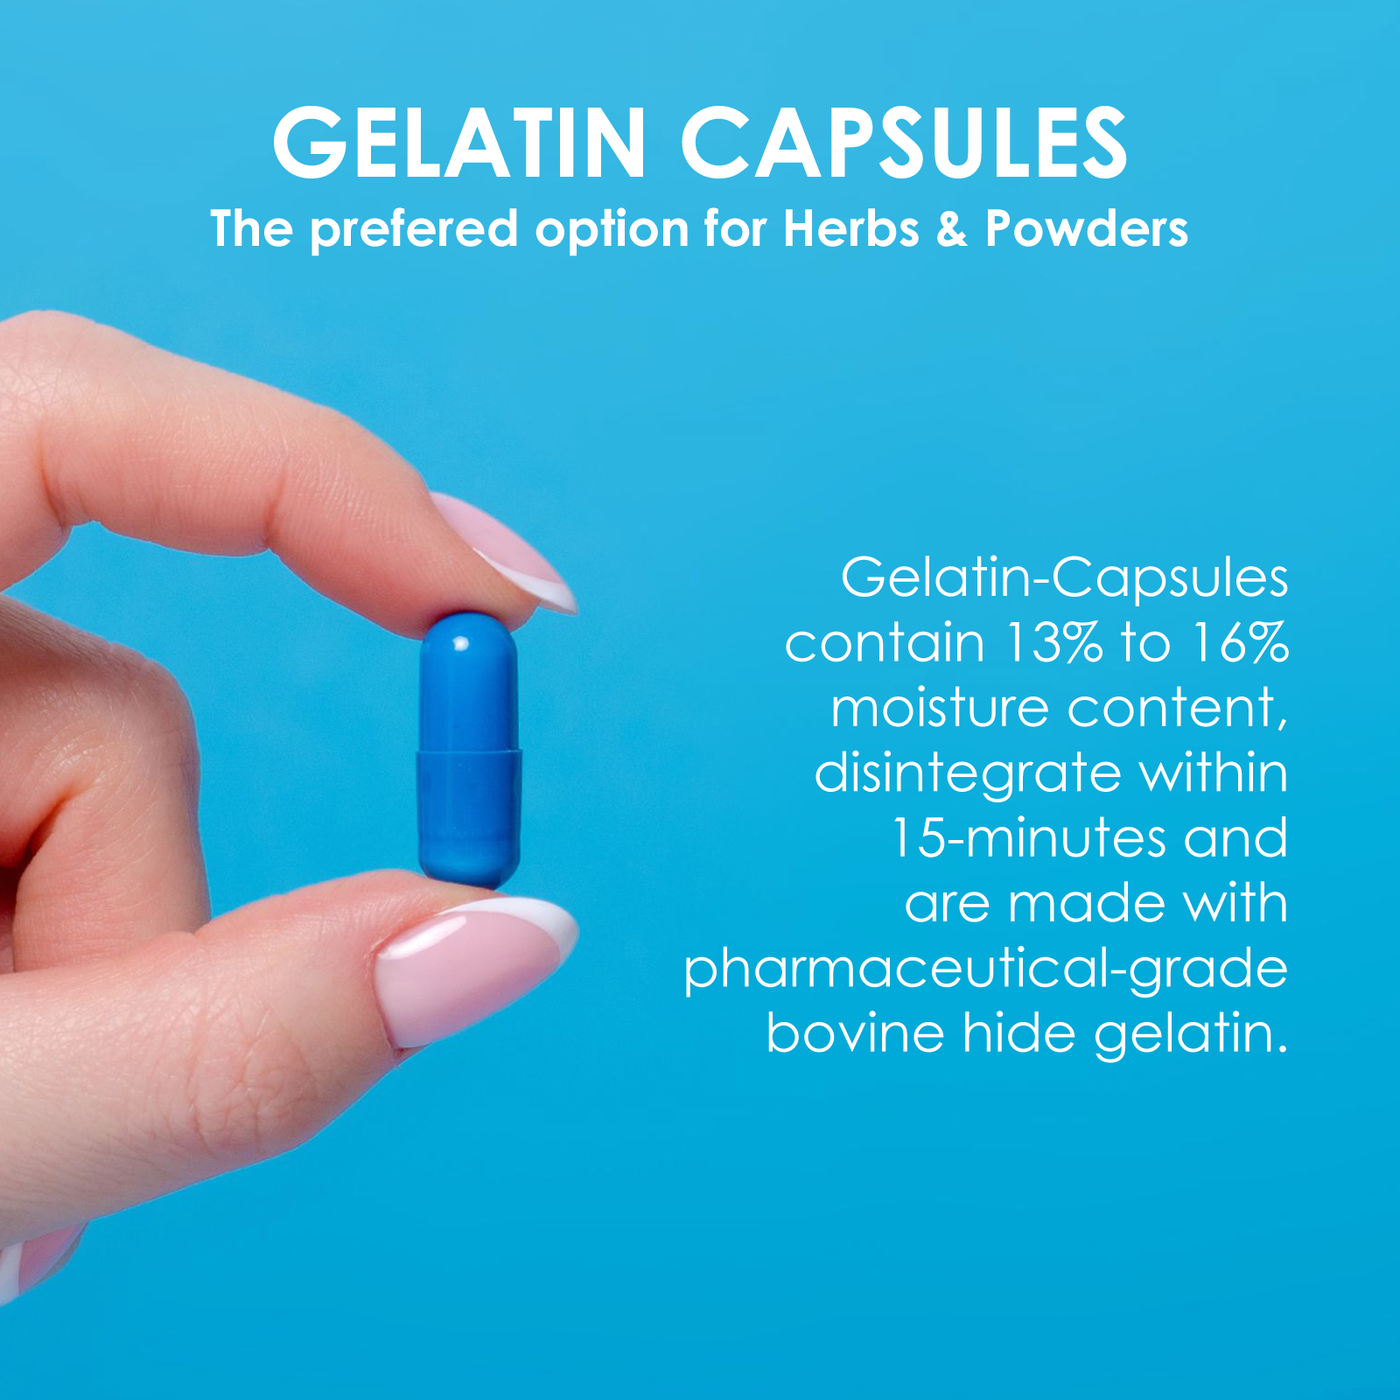 Colored Size 0 Empty Gelatin Capsules by Capsuline - Blue/White 5000 Count - 5000